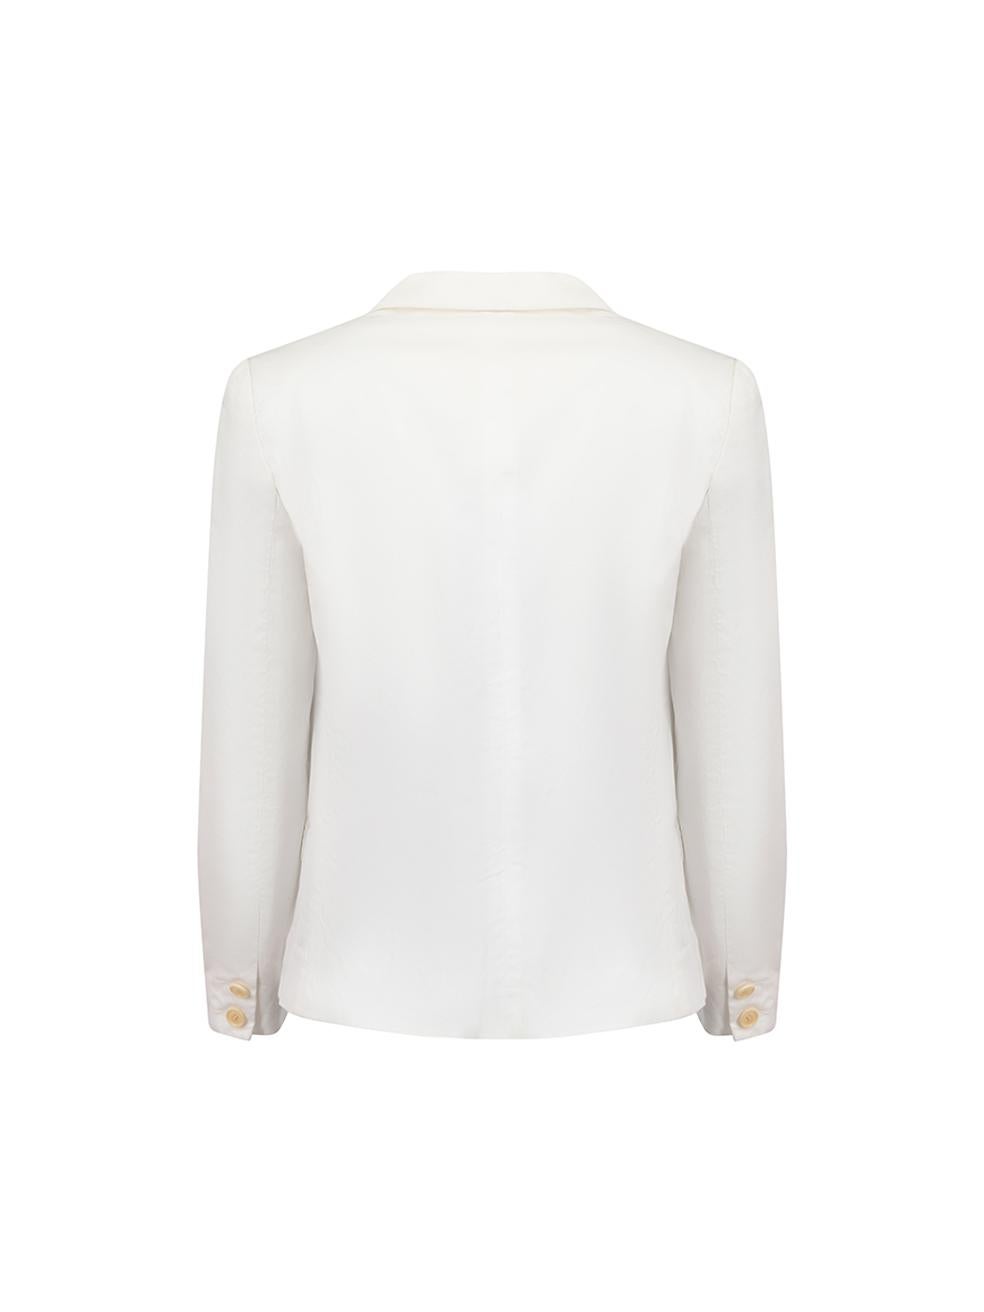 Isabel Marant Étoile White Button Up Blazer Size S In Good Condition For Sale In London, GB